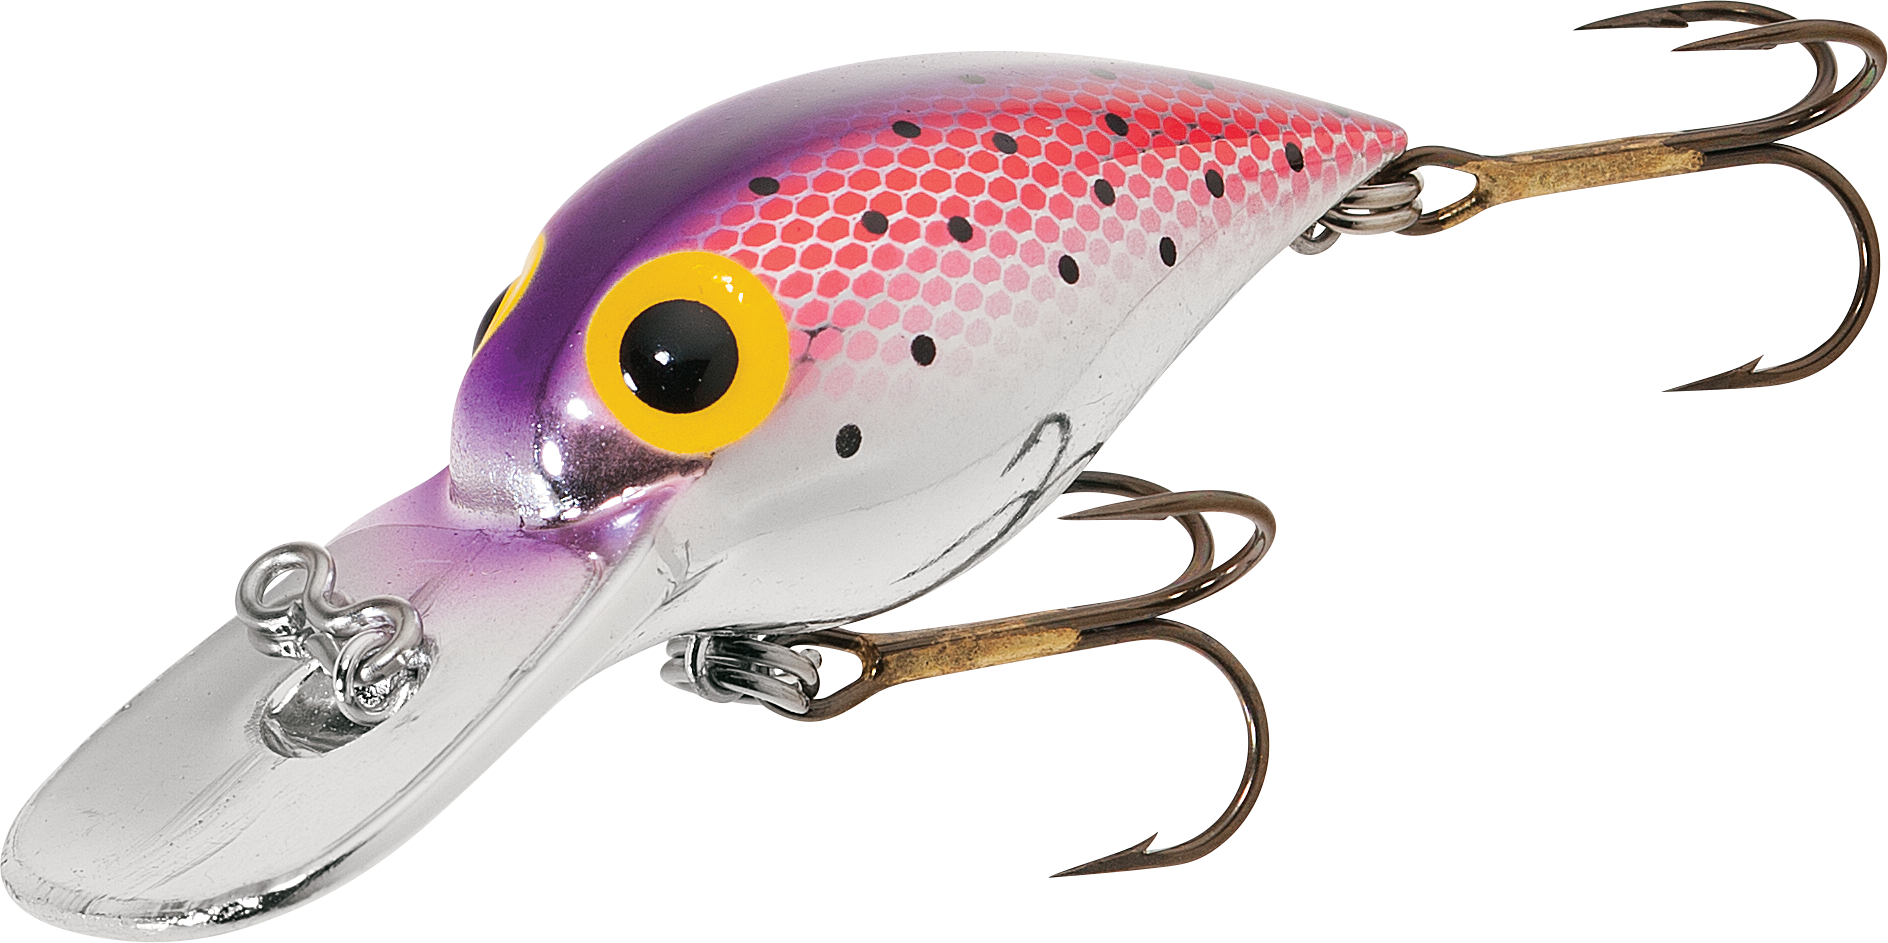 Best Salmon Lures For Rivers: Secret Lures Used By Guides